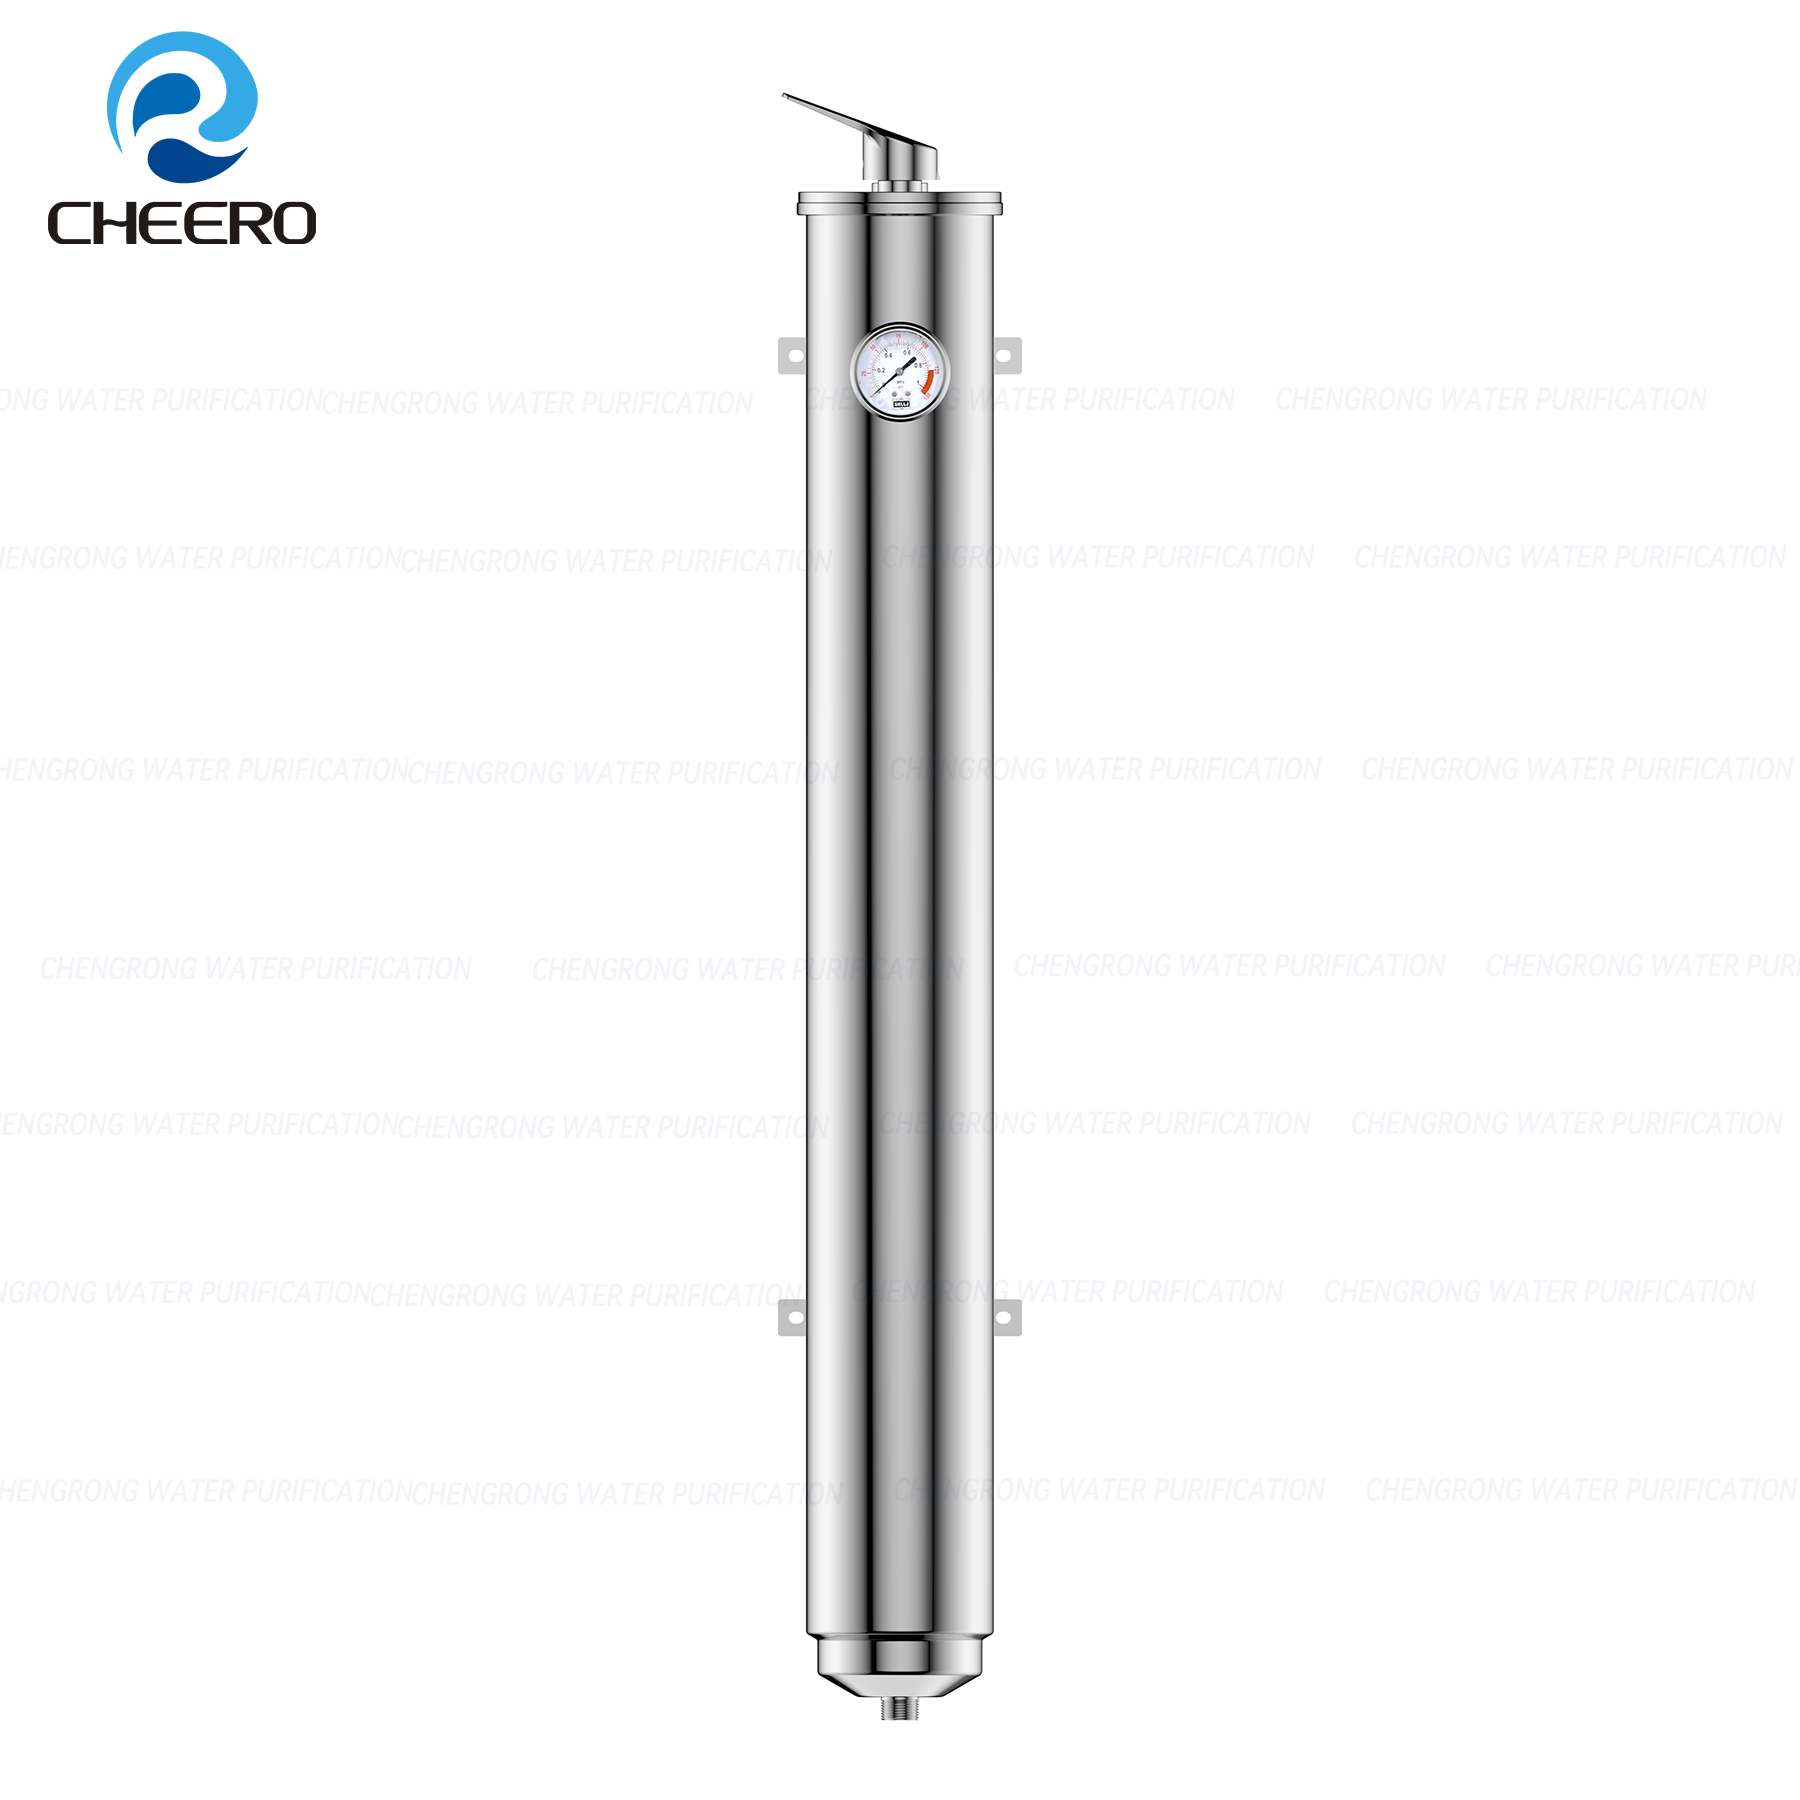 OUTDOOR WATER FILTER UF-2B 3000L/H